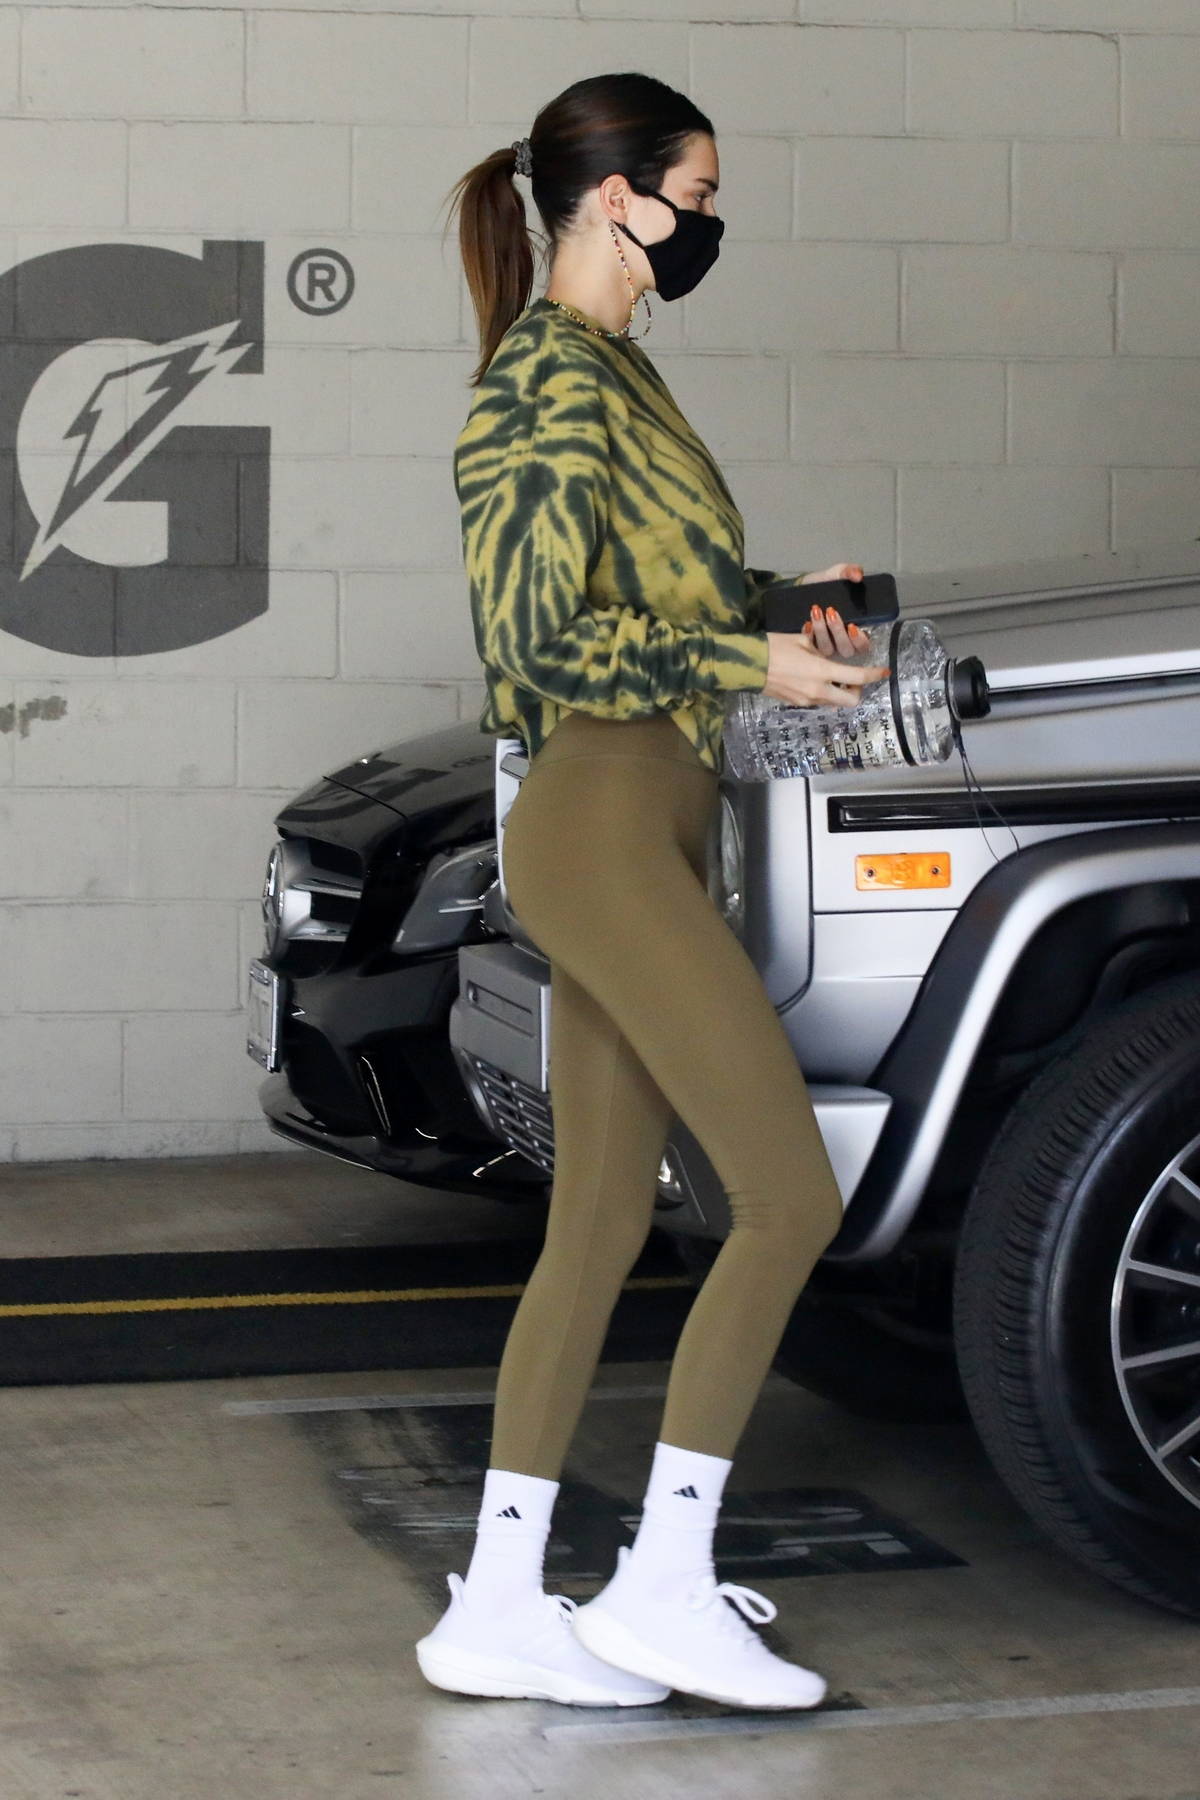 Kendall Jenner displays her model figure in green leggings while